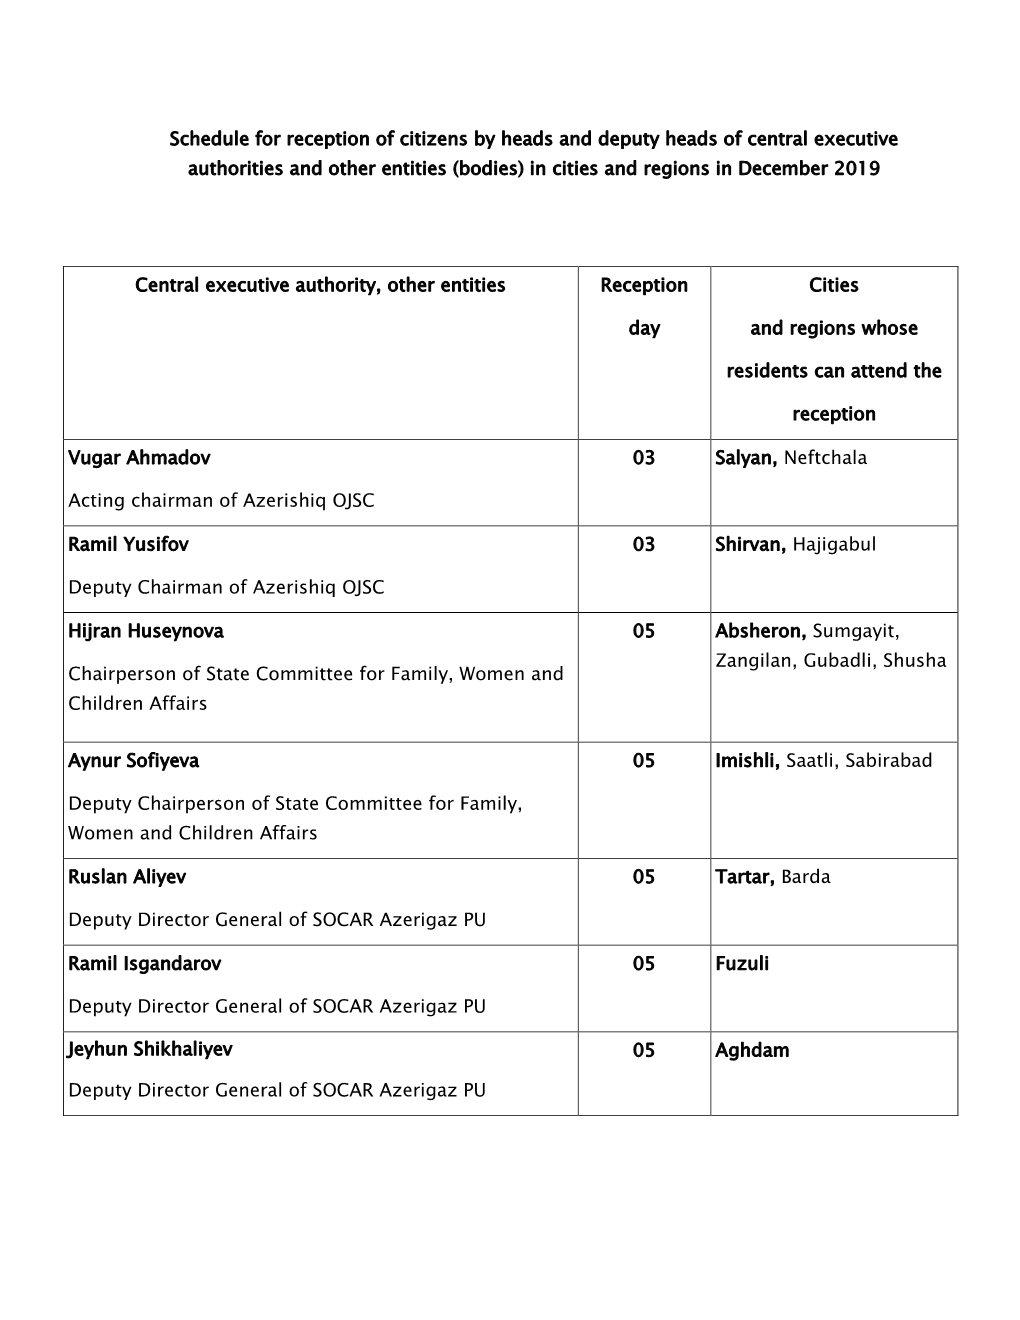 Schedule for Reception of Citizens by Heads and Deputy Heads of Central Executive Authorities and Other Entities (Bodies) in Cities and Regions in December 2019